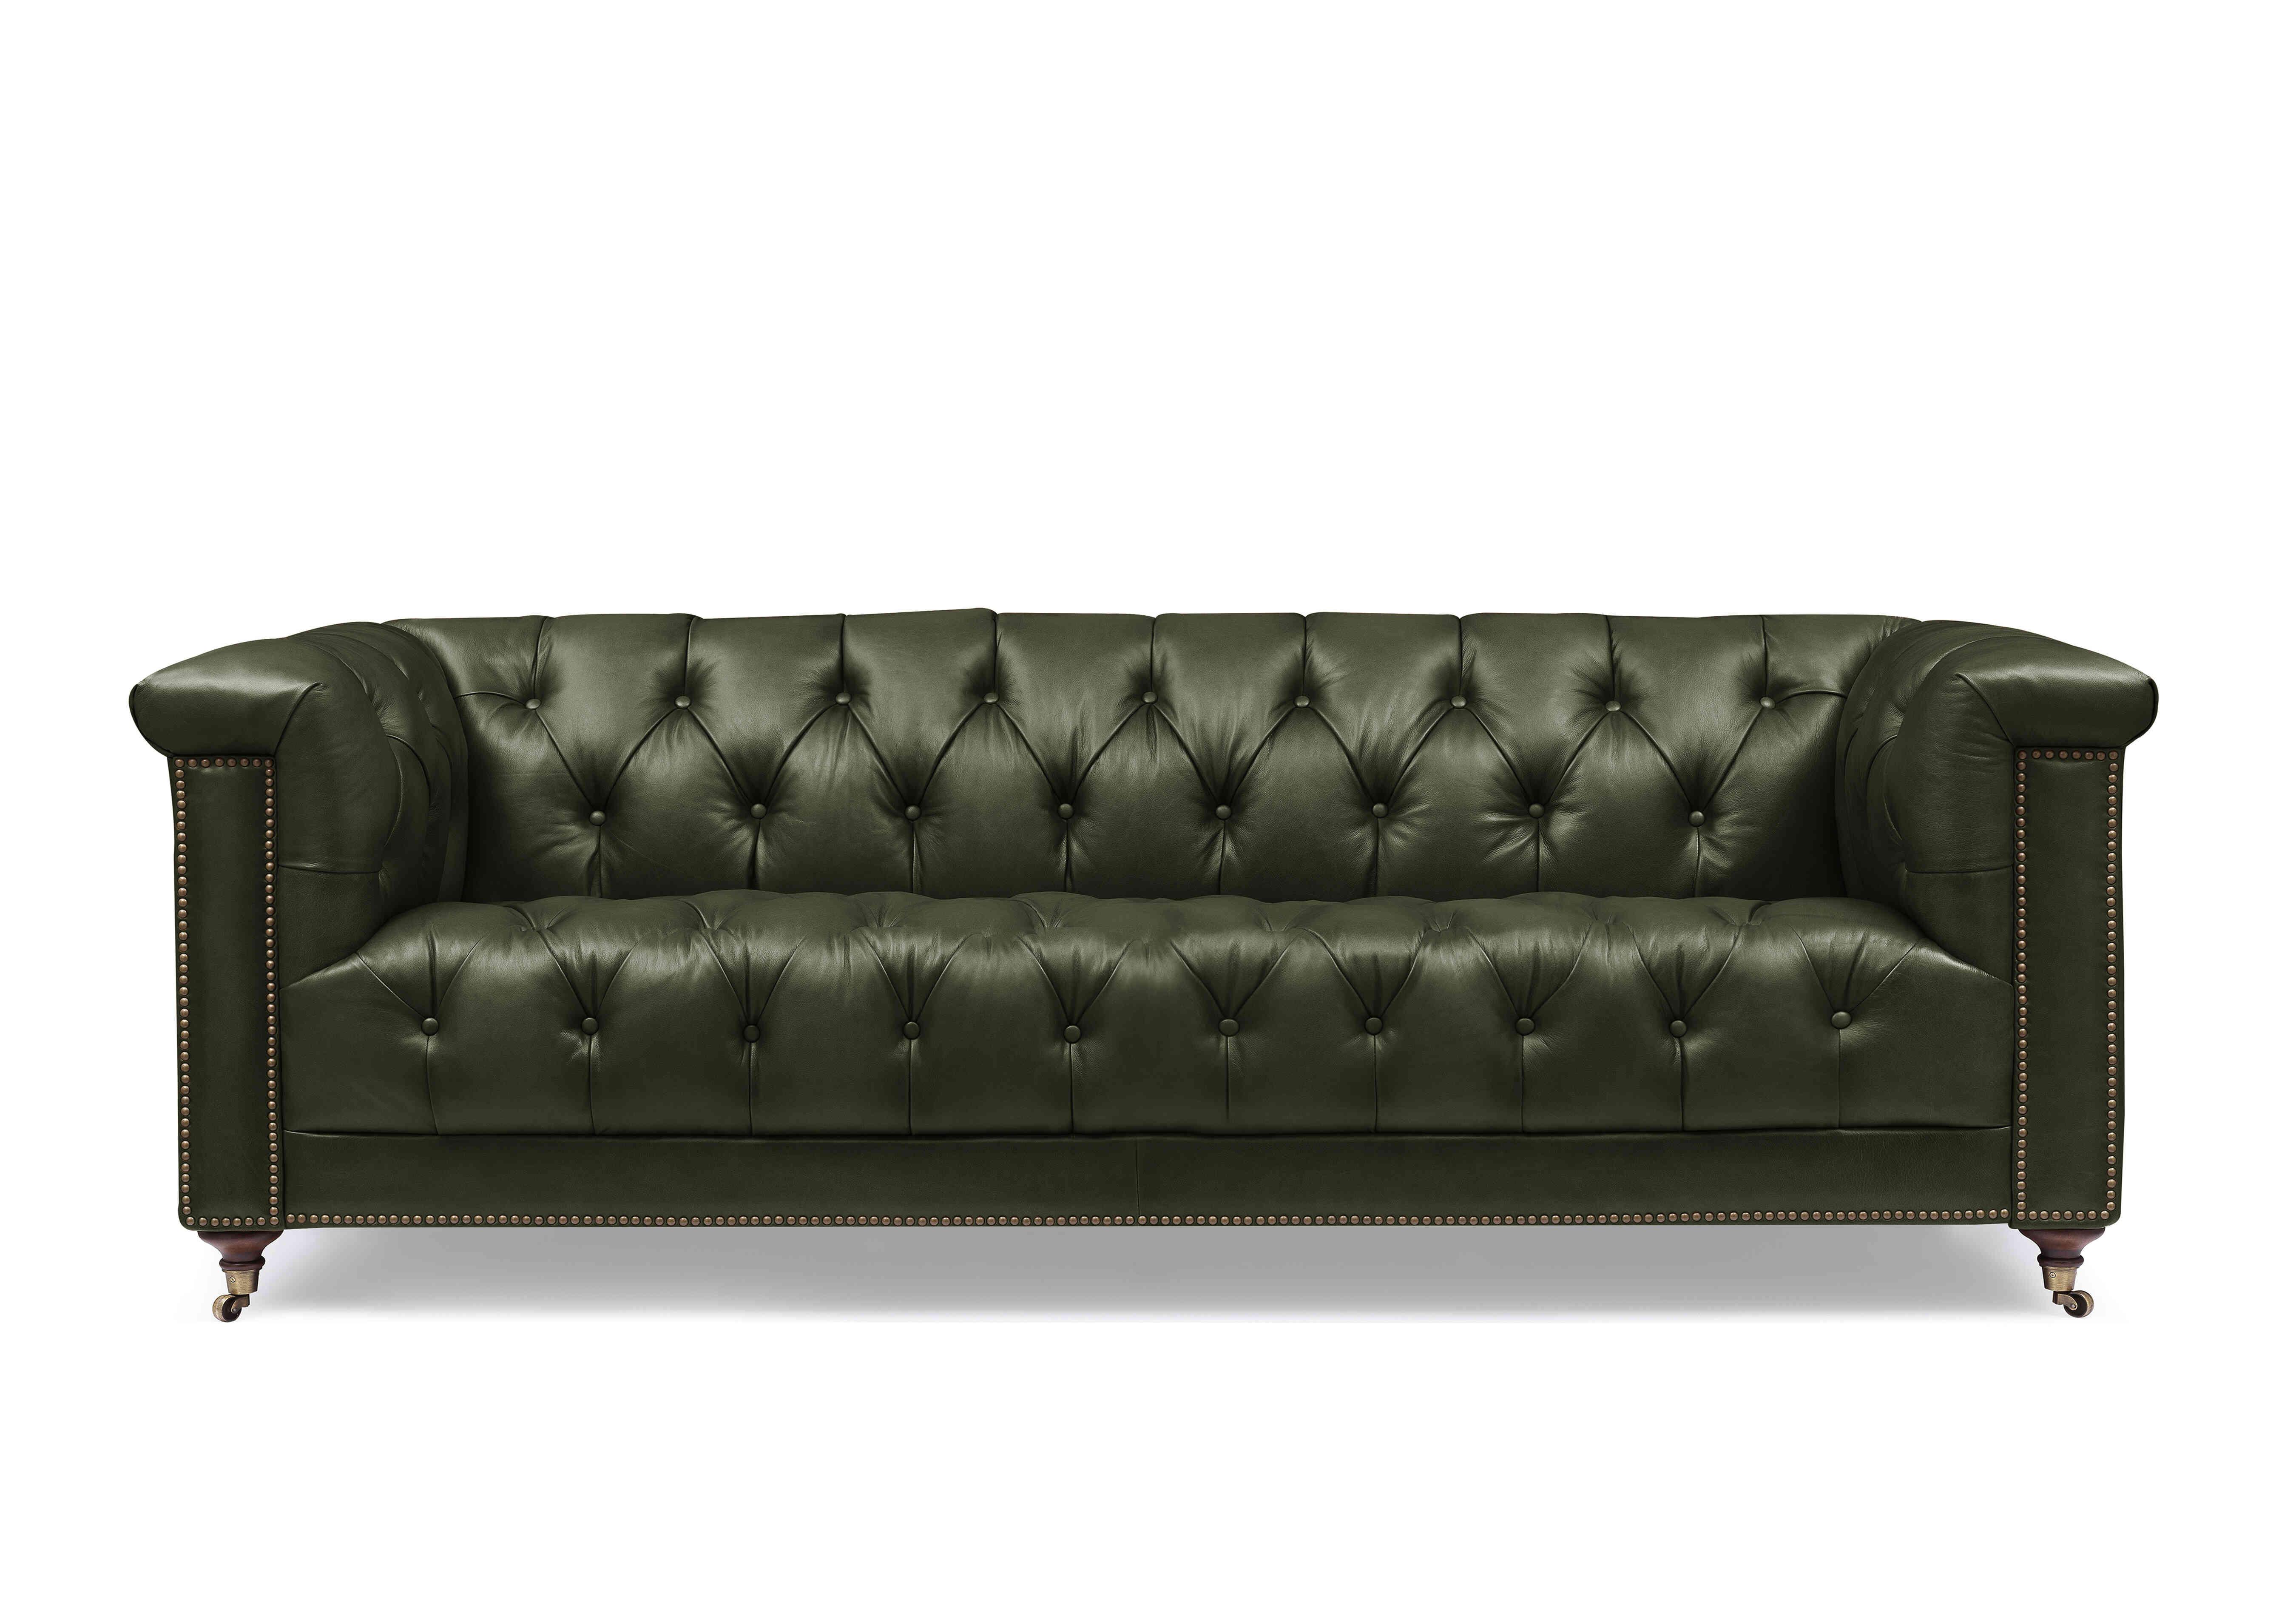 Wallace 4 Seater Leather Chesterfield Sofa with USB-C in X3y1-1965ls Emerald on Furniture Village